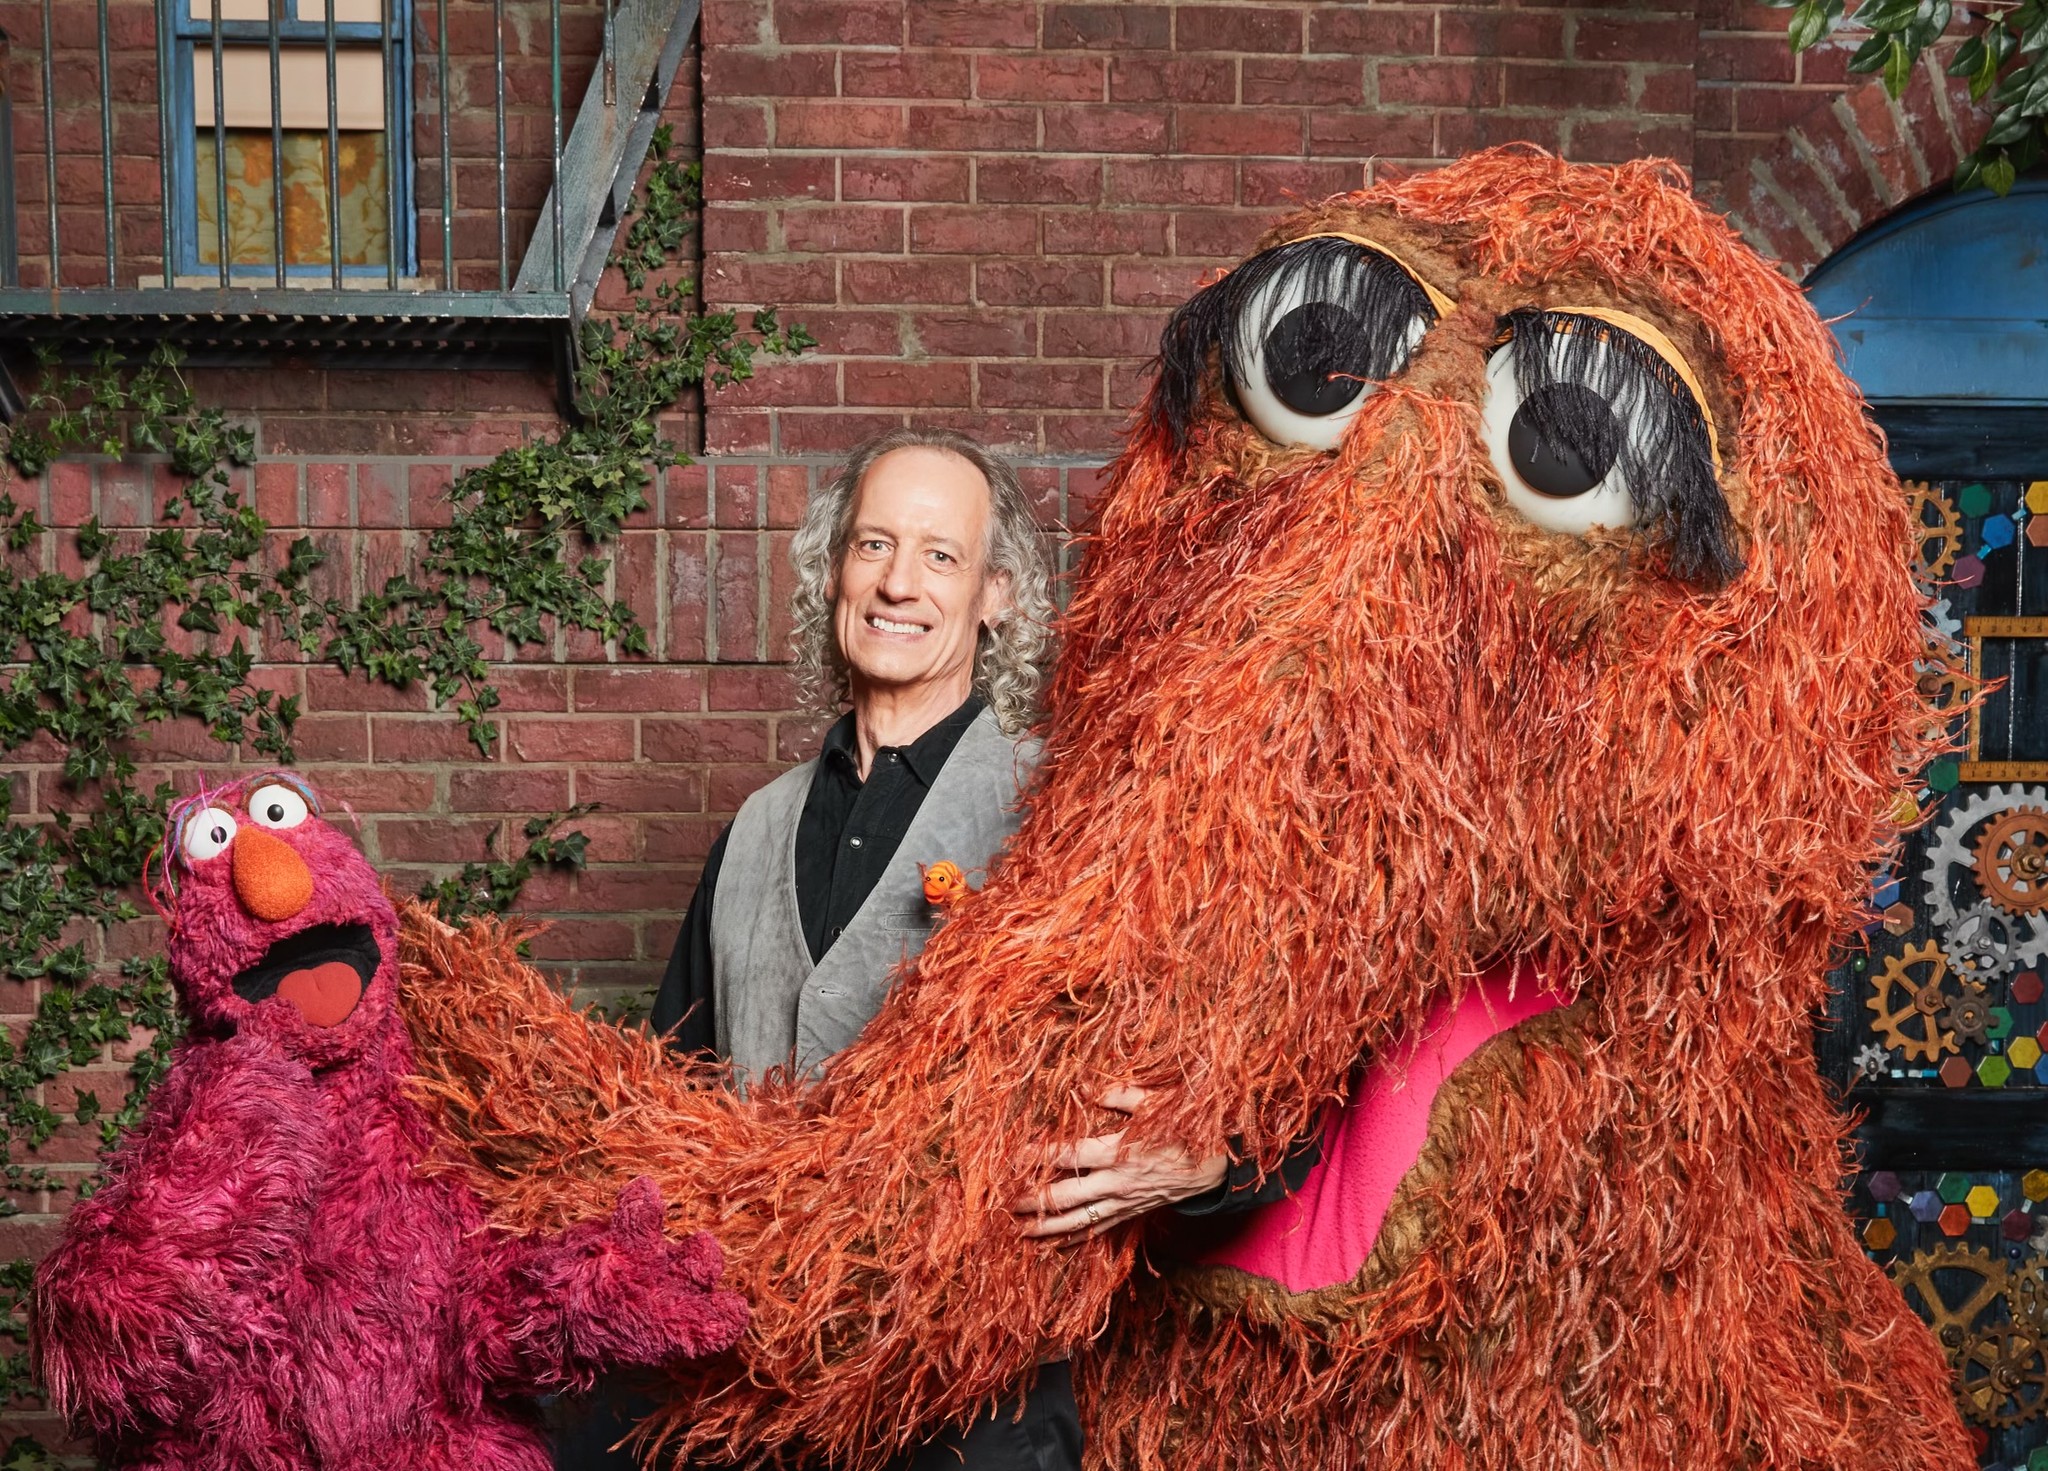 Martin P. Robinson stands between two Muppets: Telly Monster, who is red and furry, and Mr. Snuffleupagus, a woolly mammoth with long eyelashes